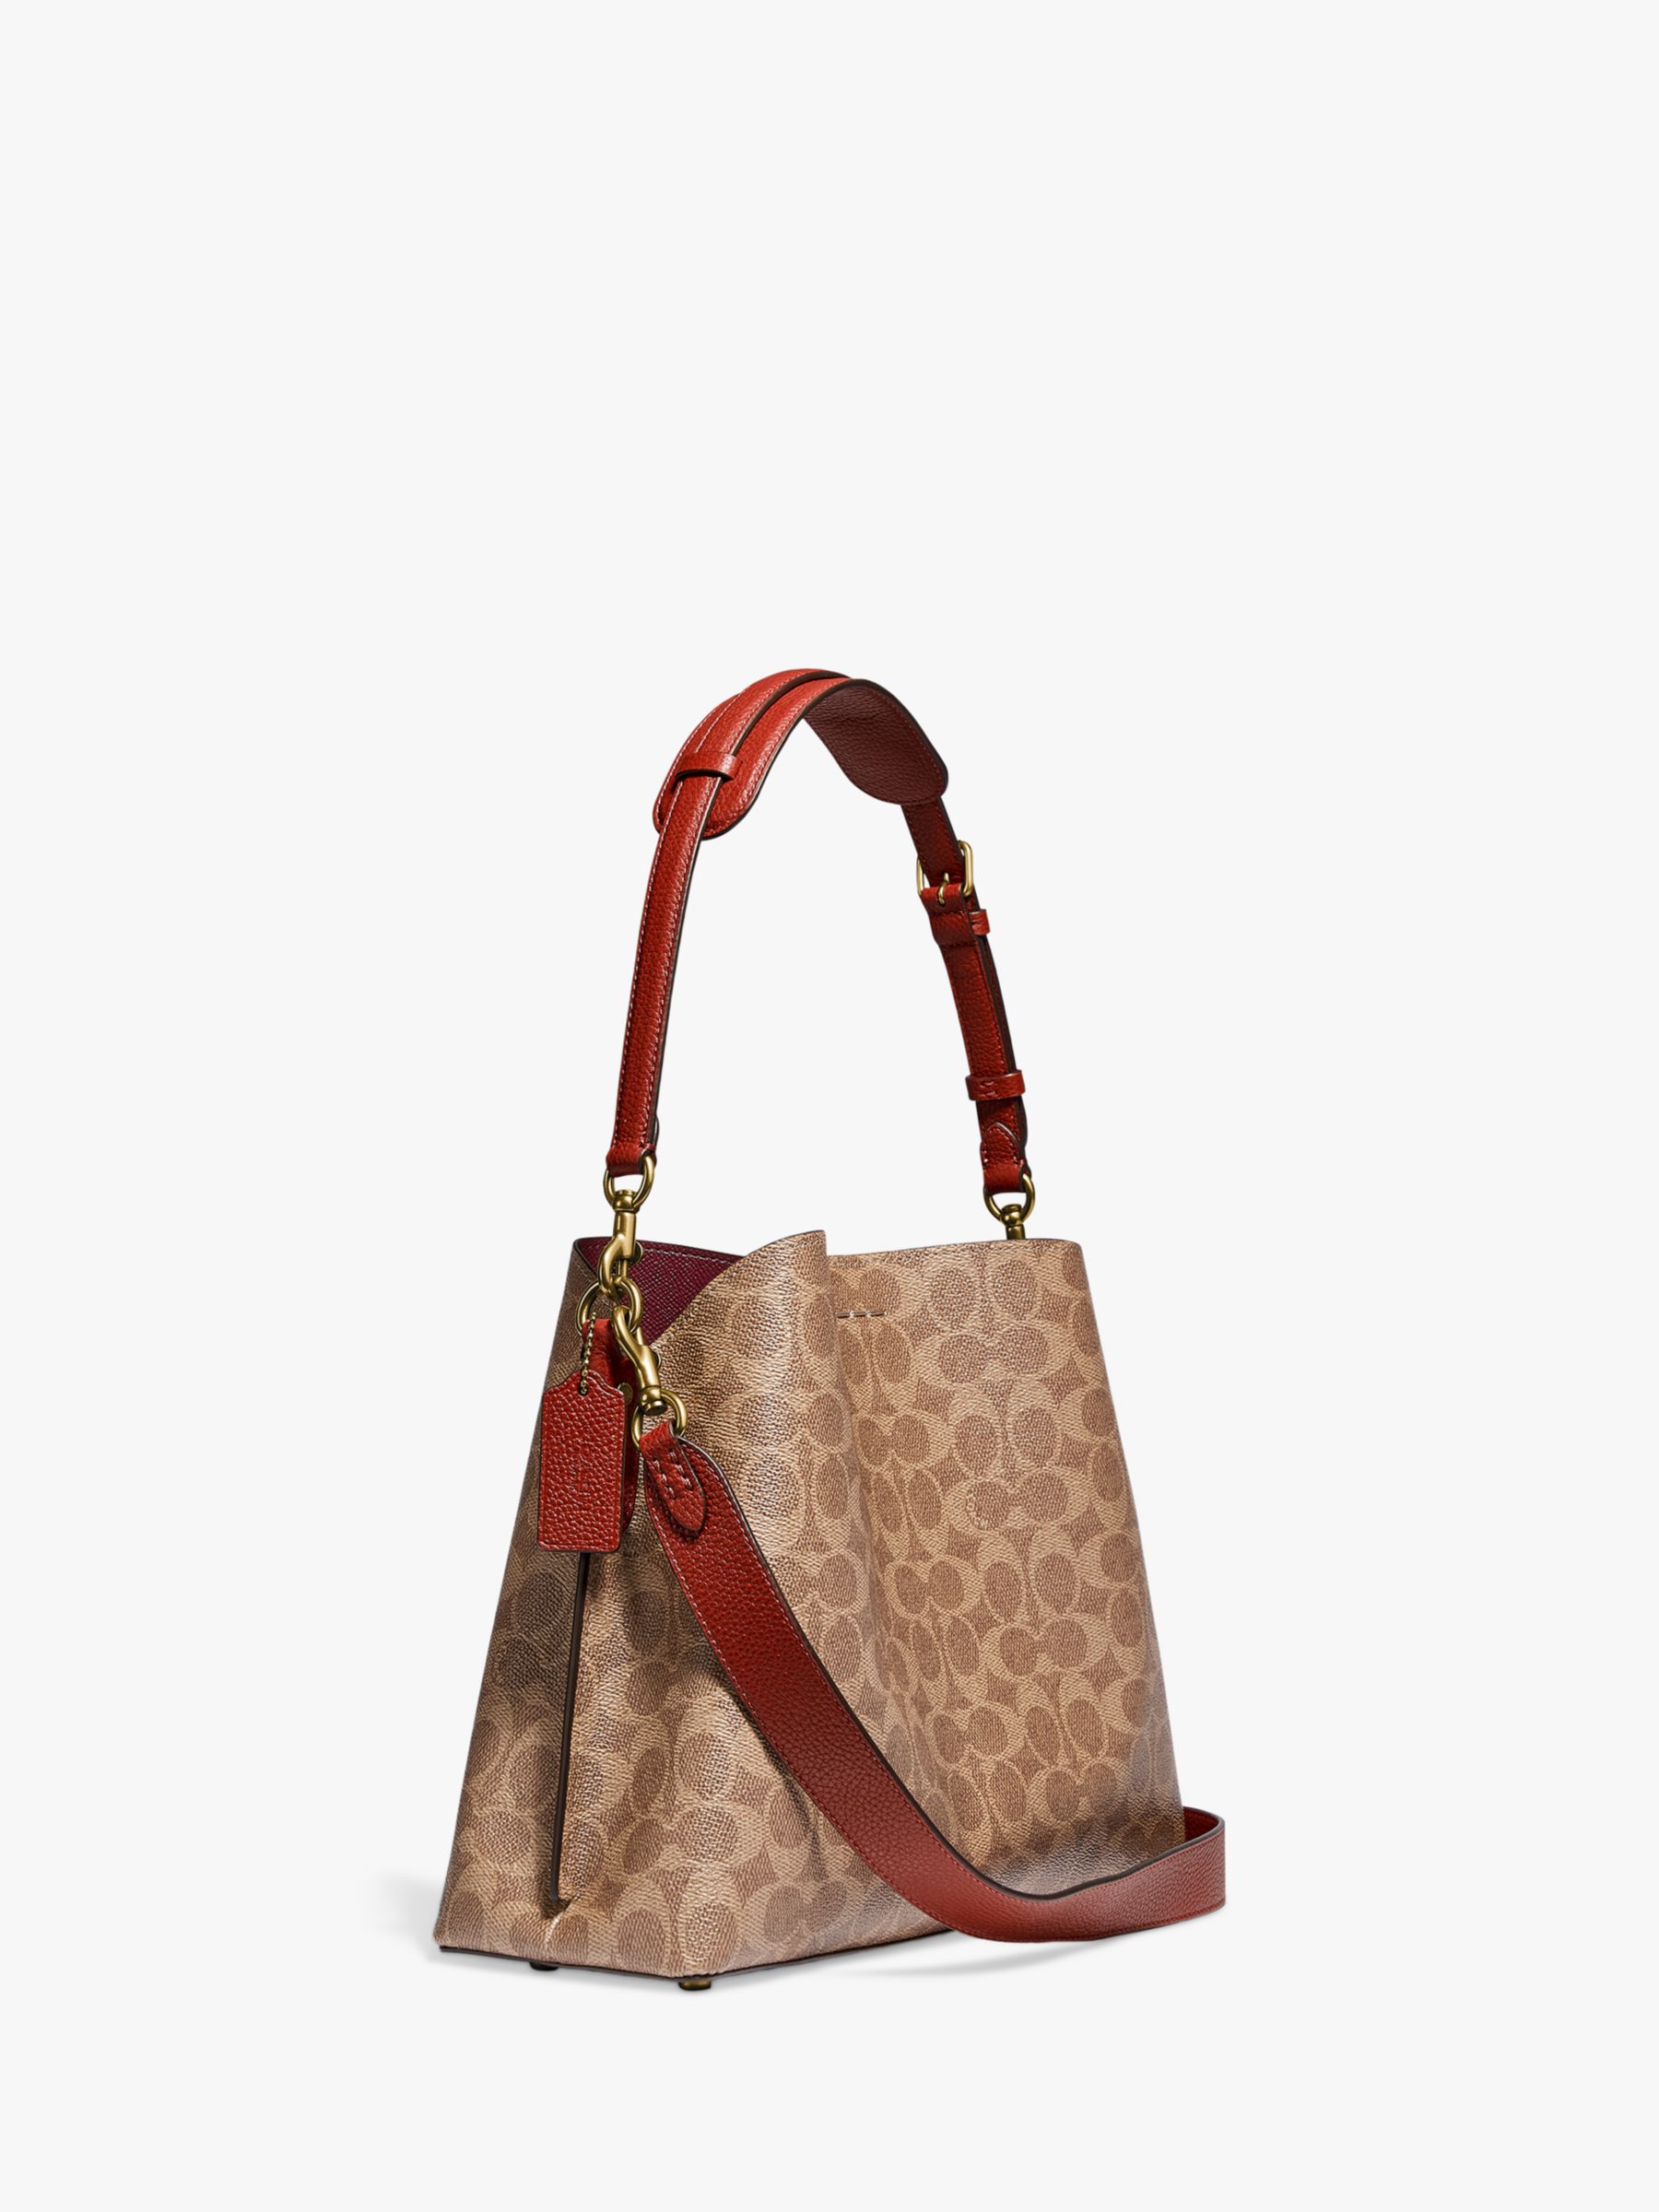 Buy Coach Willow Signature Leather Shoulder Bag, Tan Rust Online at johnlewis.com